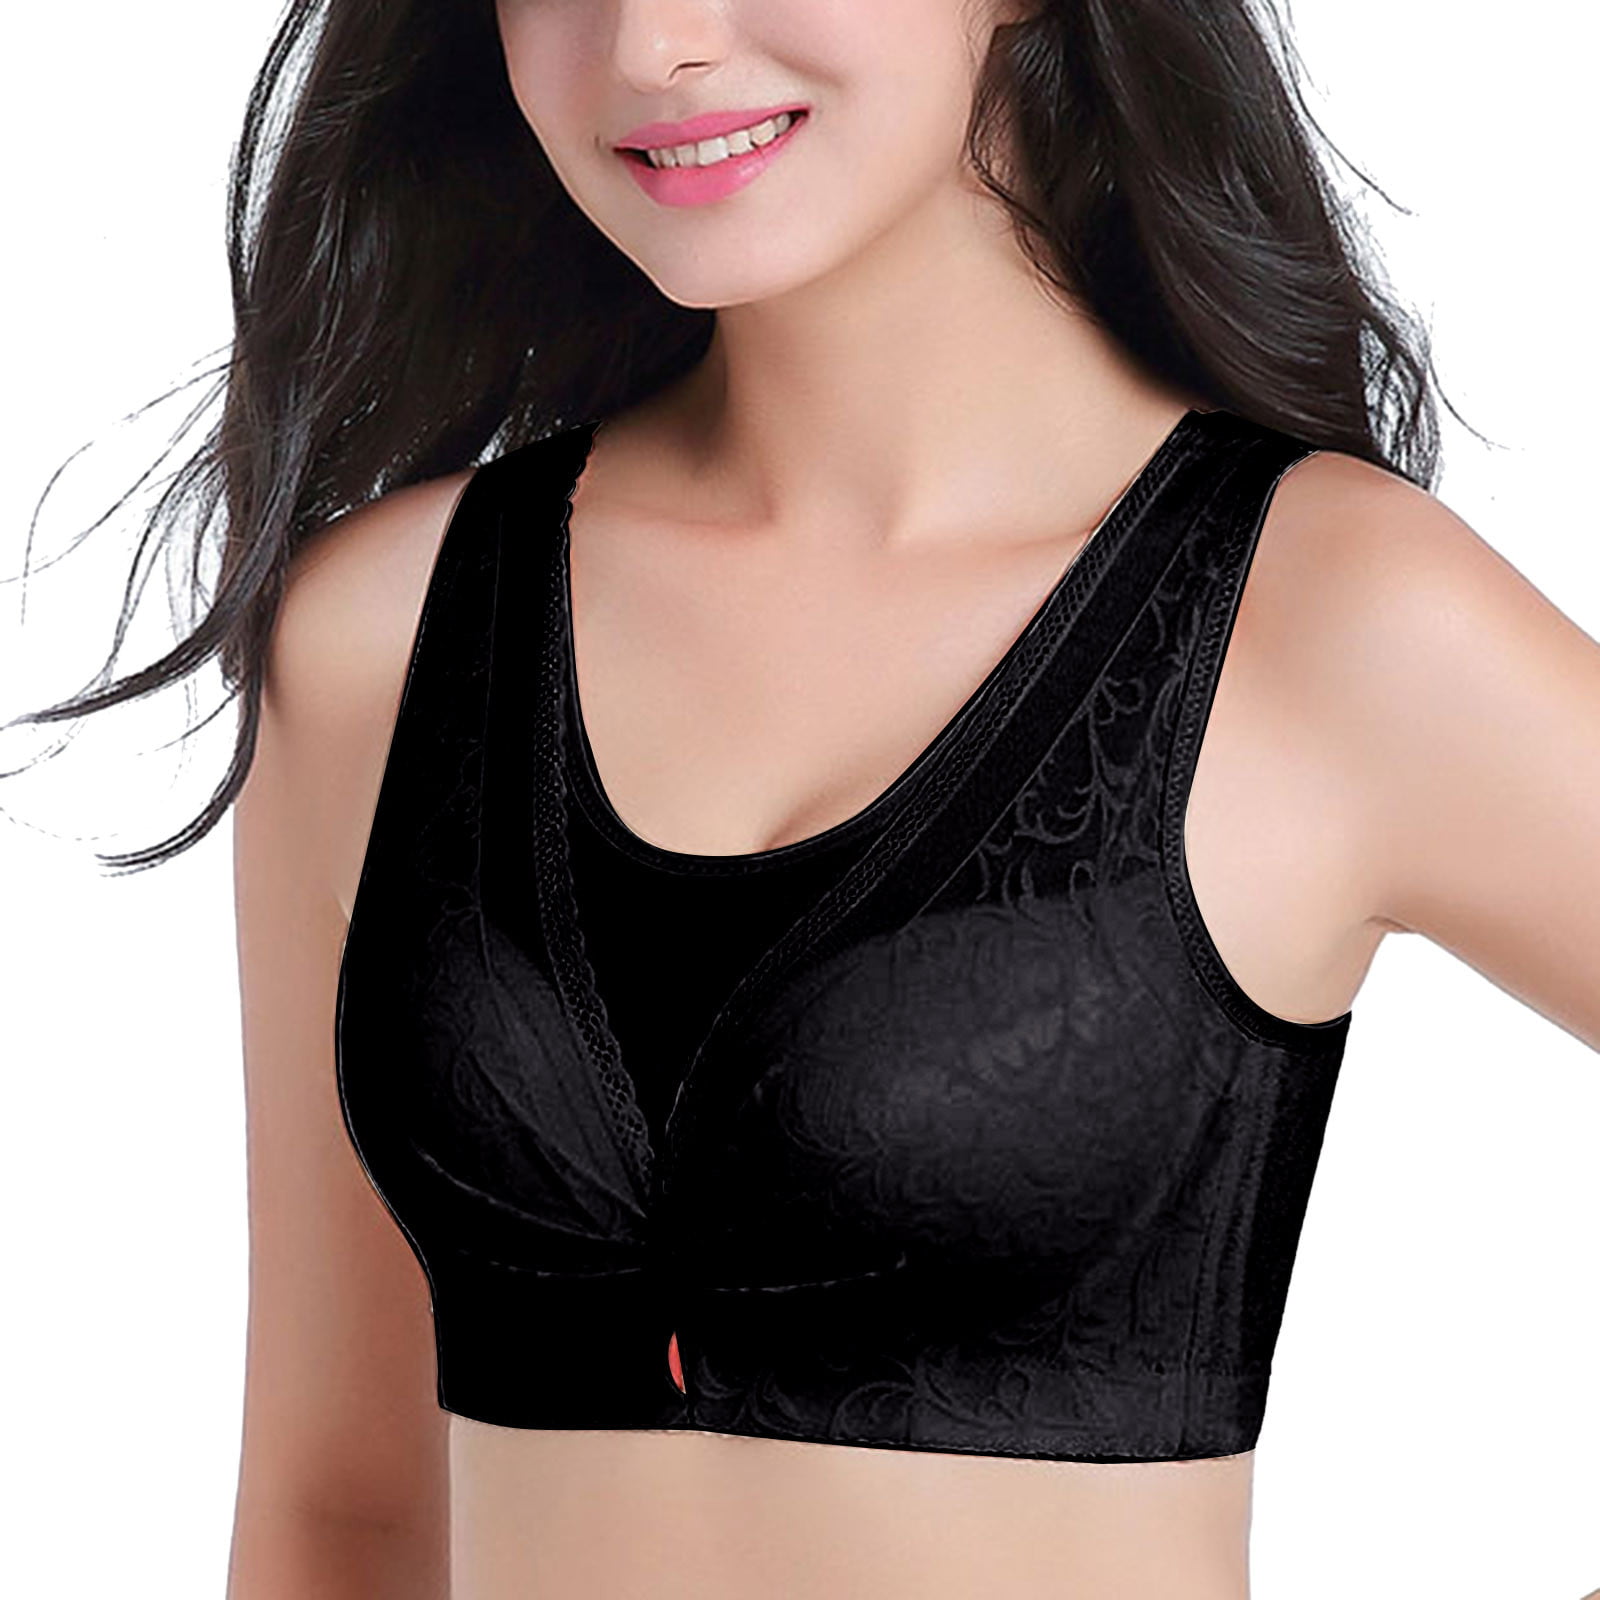 LEEy-World Lingerie for Women Underwear for Women Push Up Adjustable Bra  Tube Top Sagging Breast No Wire Full Cup Lift Underwear Black,46/105BC